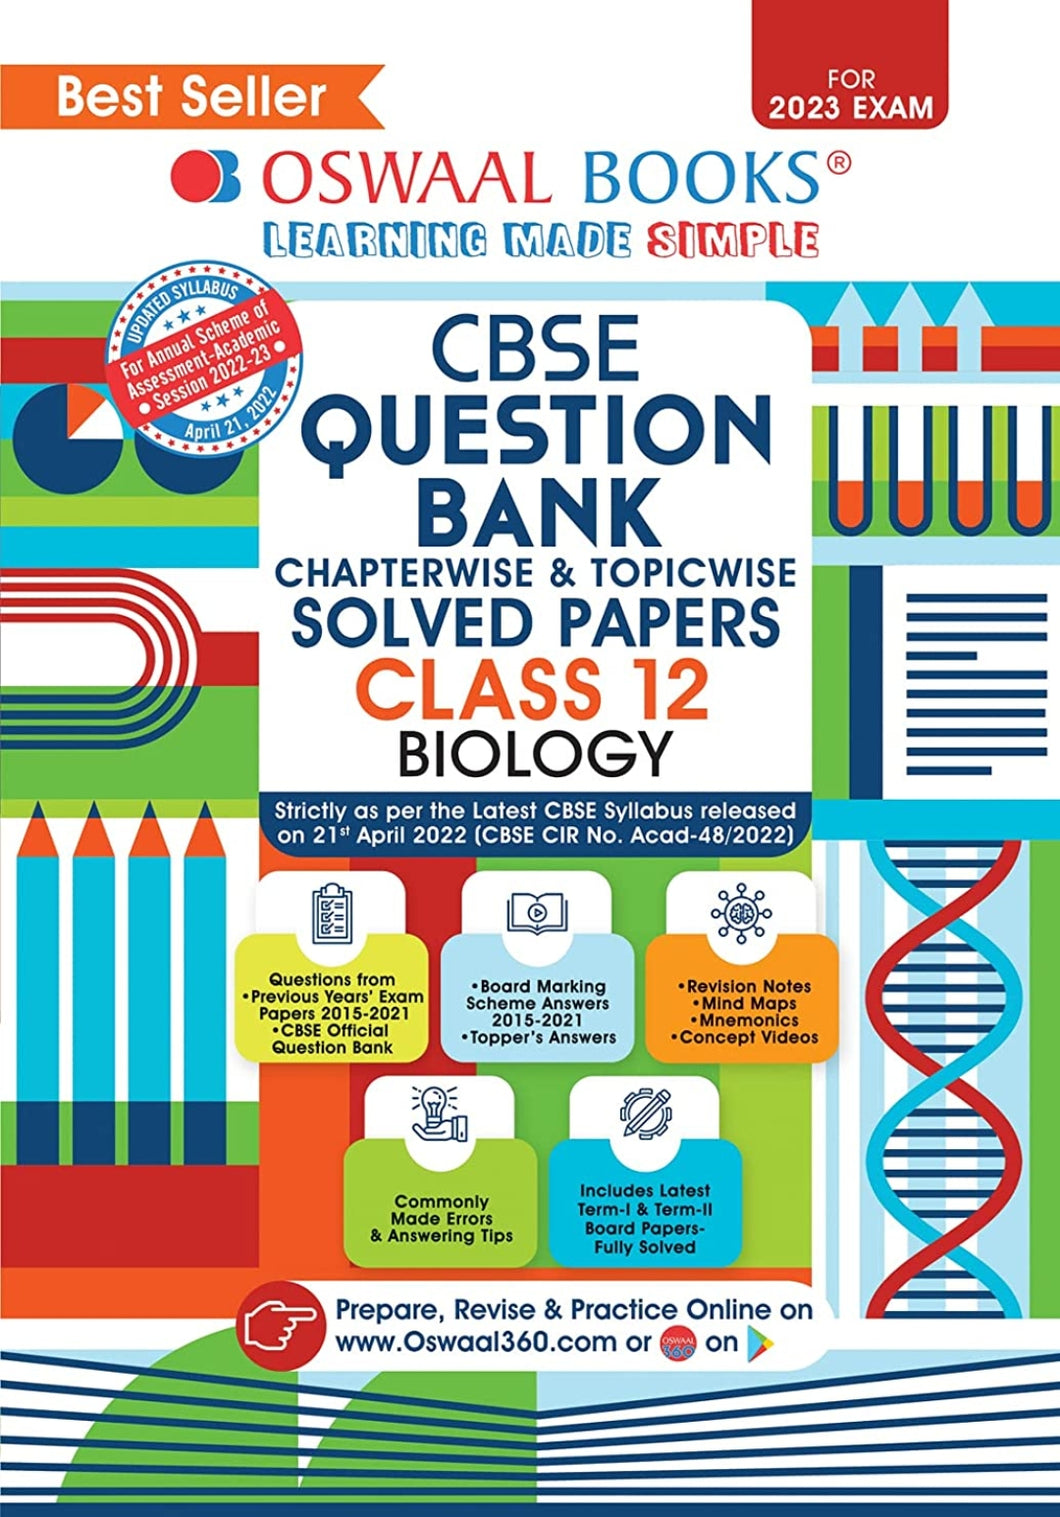 OSWAAL QUESTION BANK - CLASS 12 - BIOLOGY